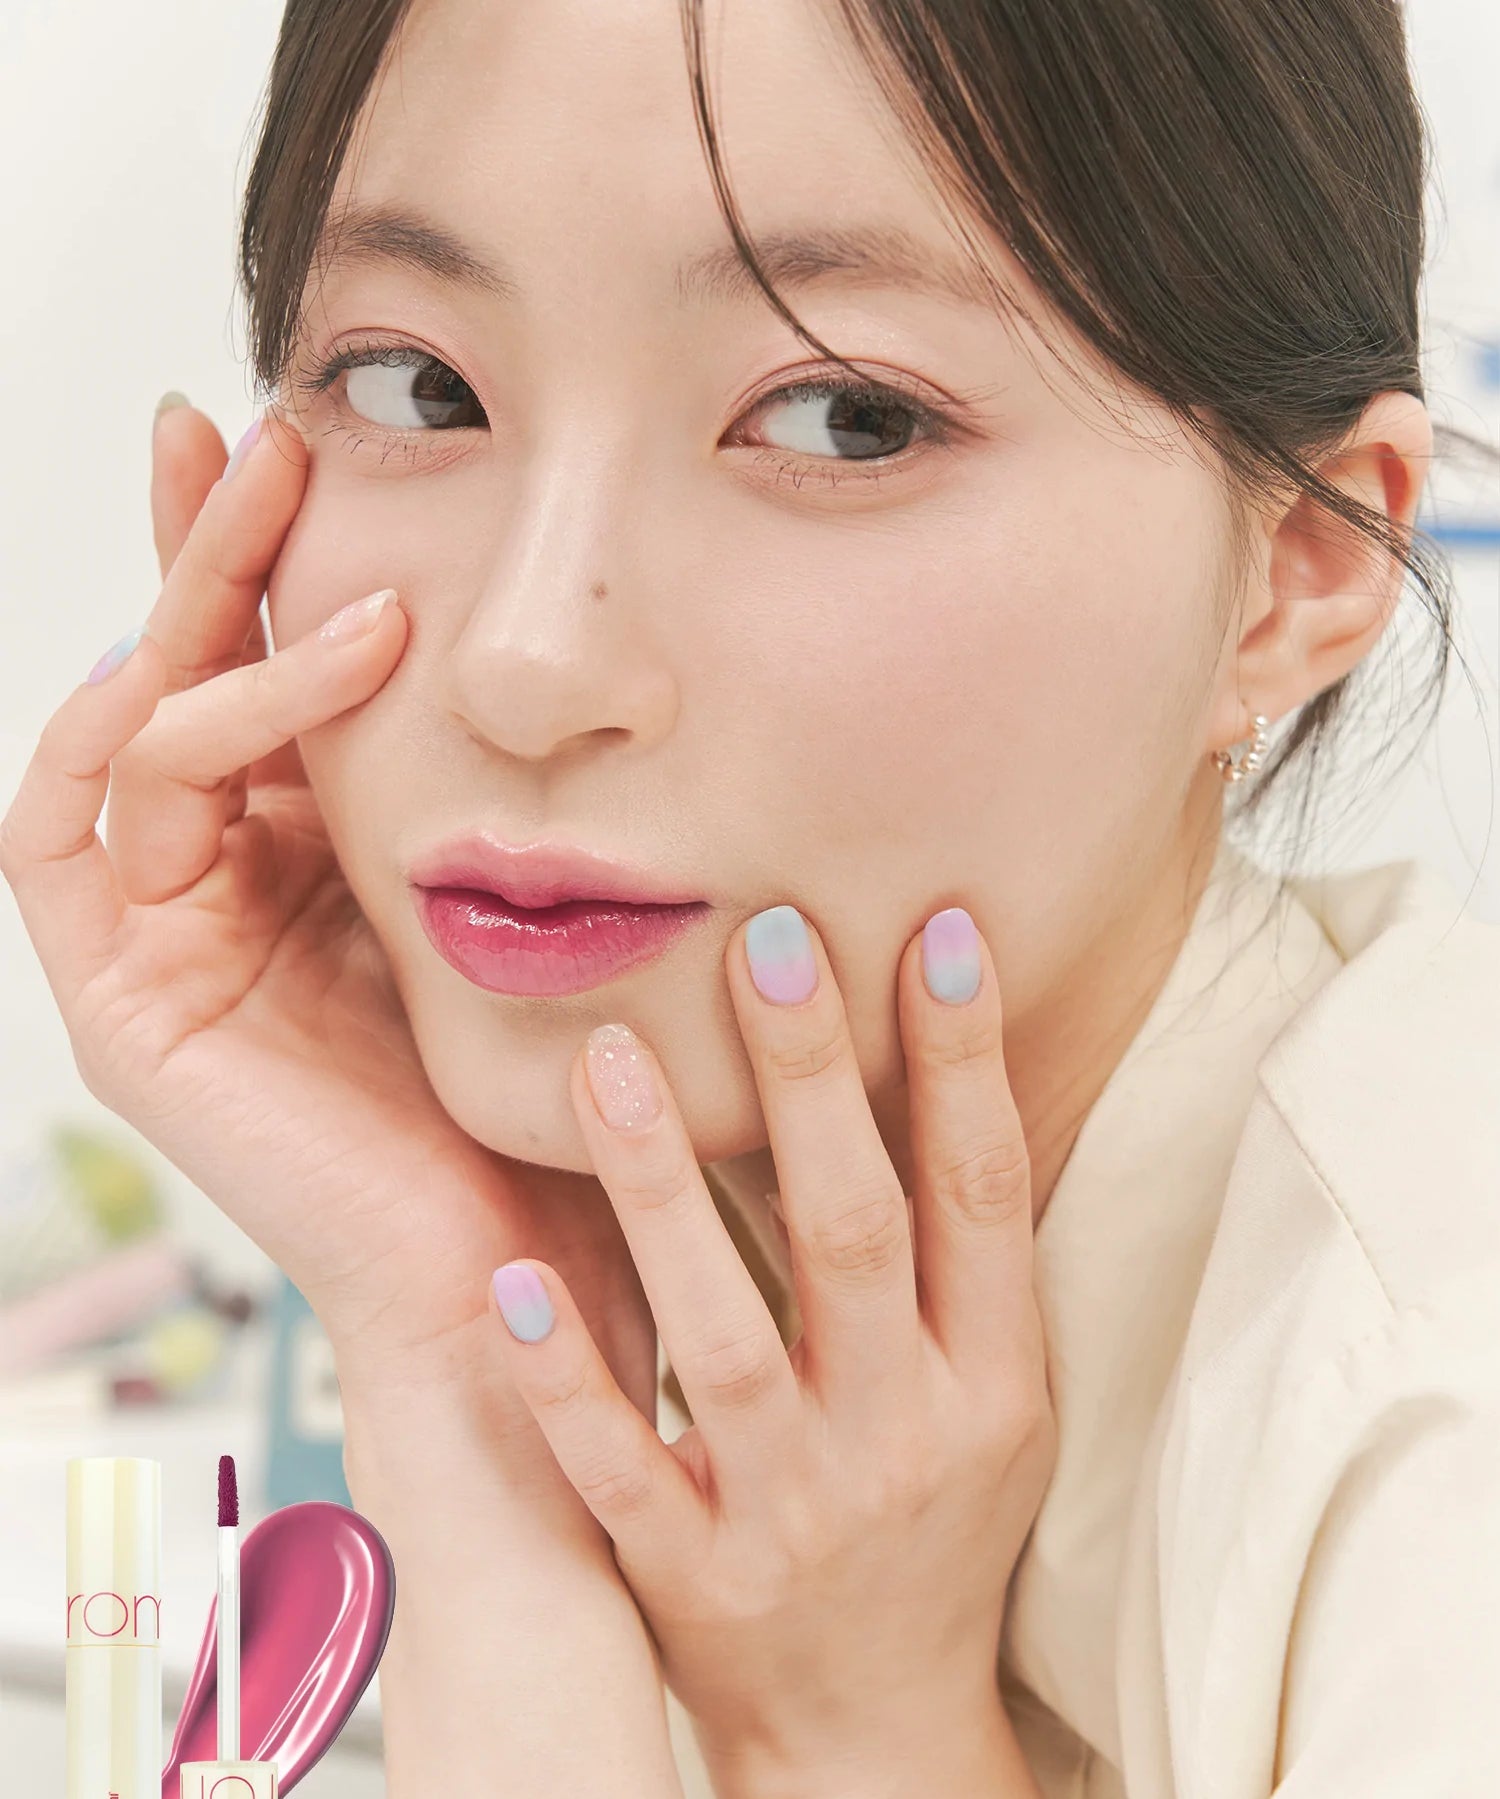 Rom&nd Juicy Lasting Tint Milk Grocery Series - Olive Kollection